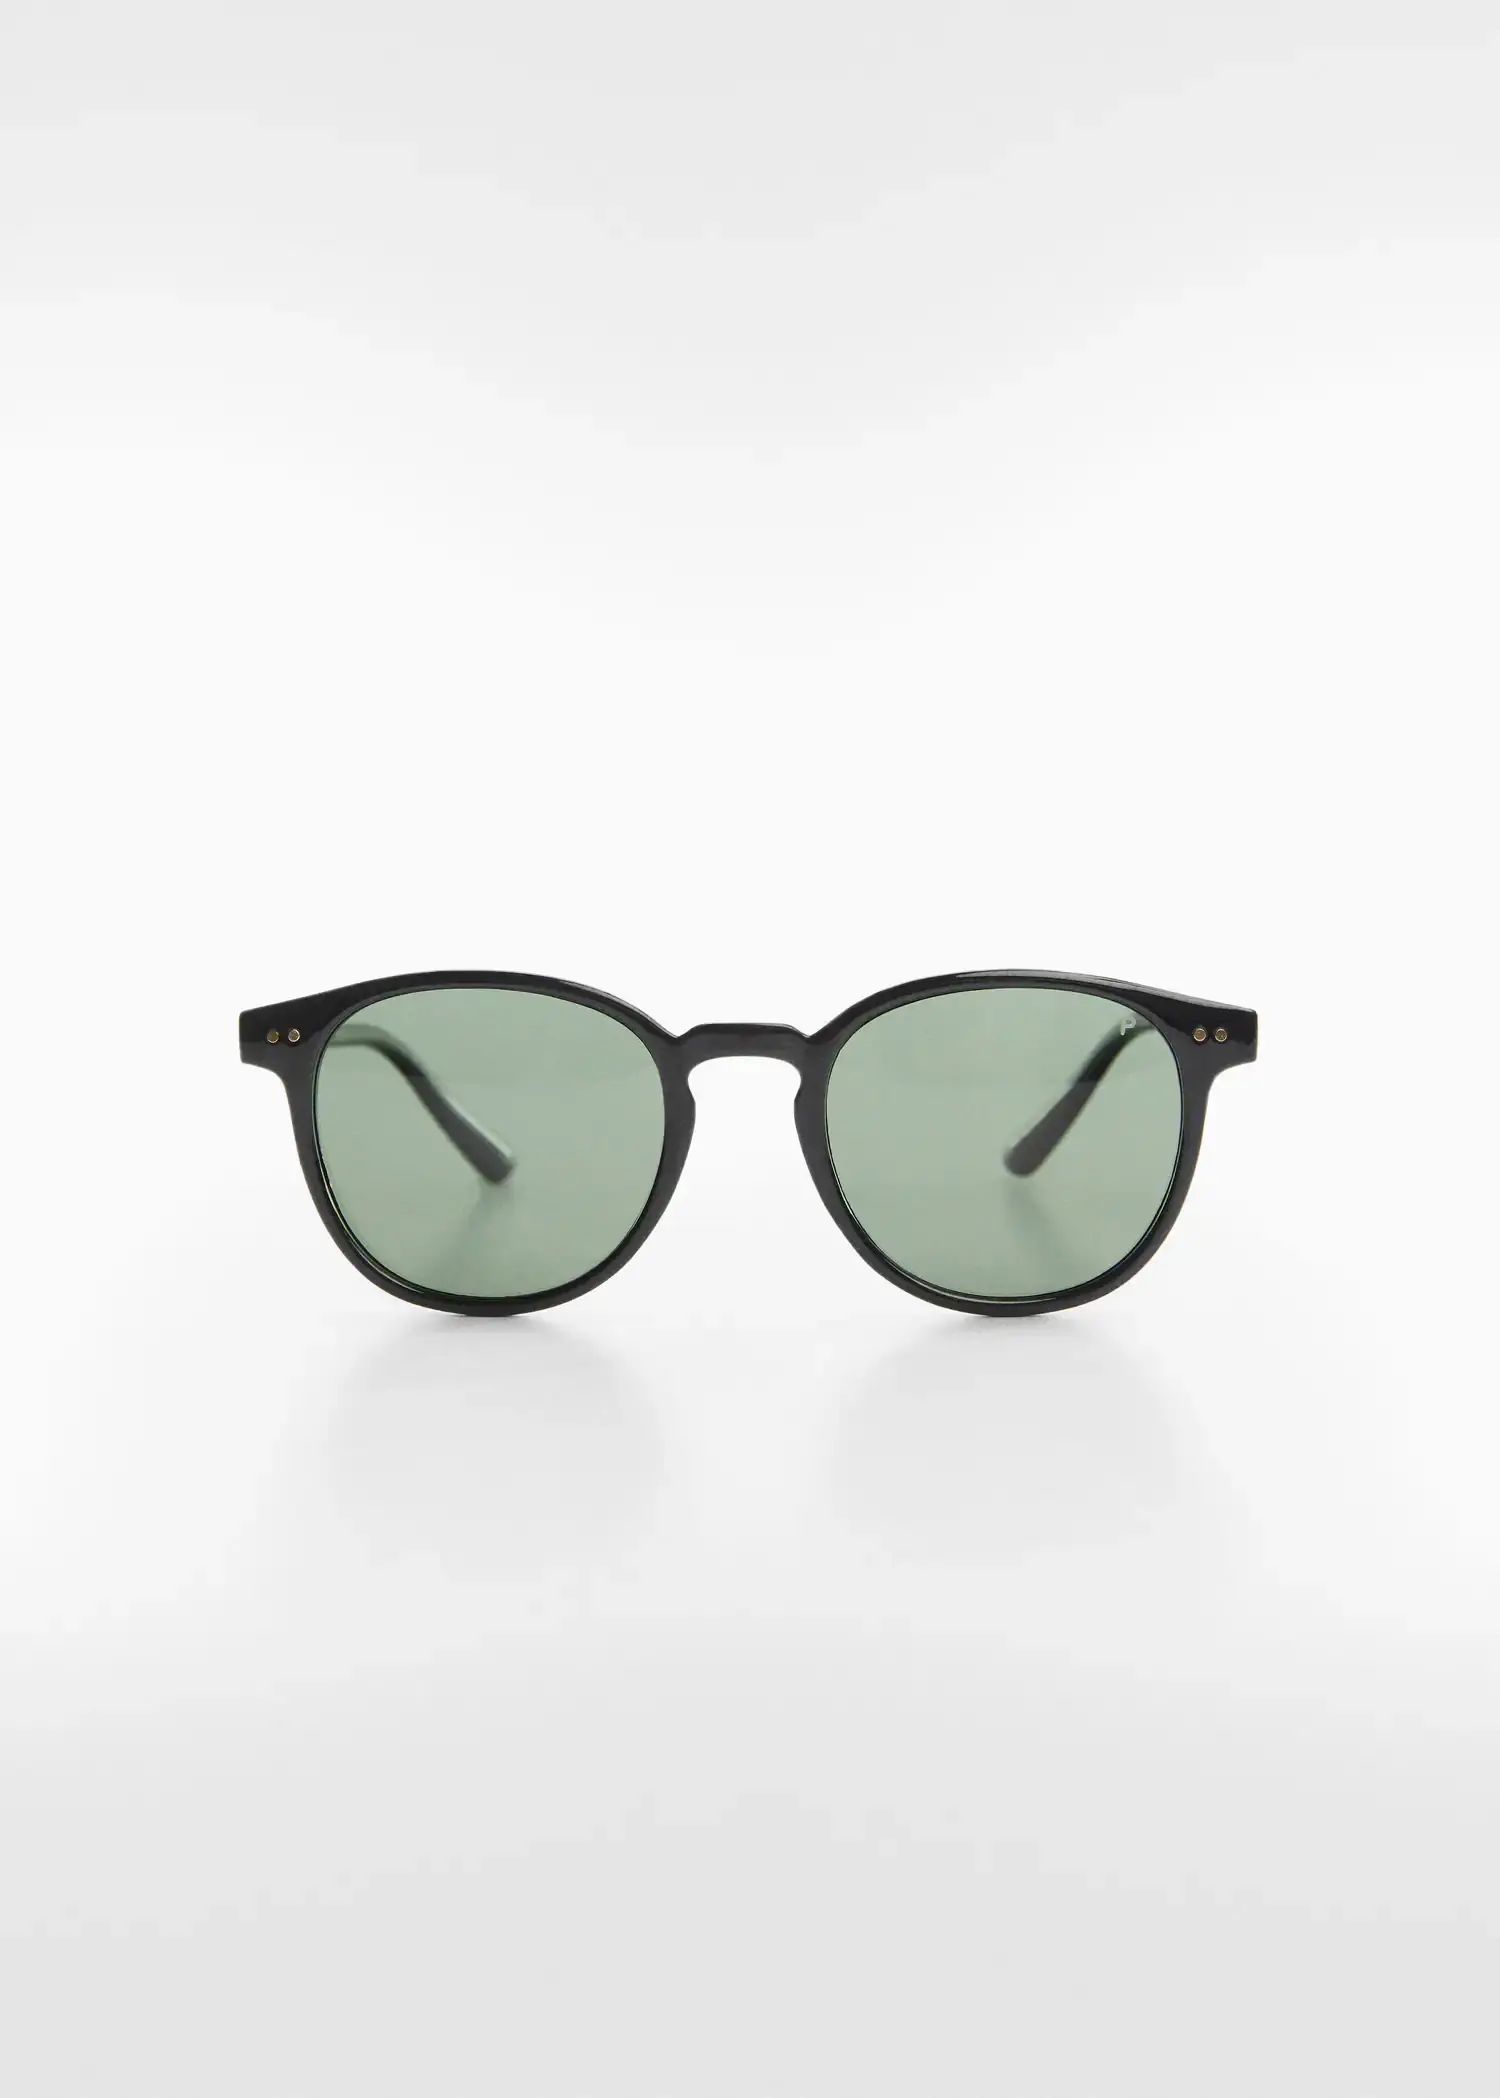 Mango Polarised sunglasses. a pair of green sunglasses sitting on top of a table. 